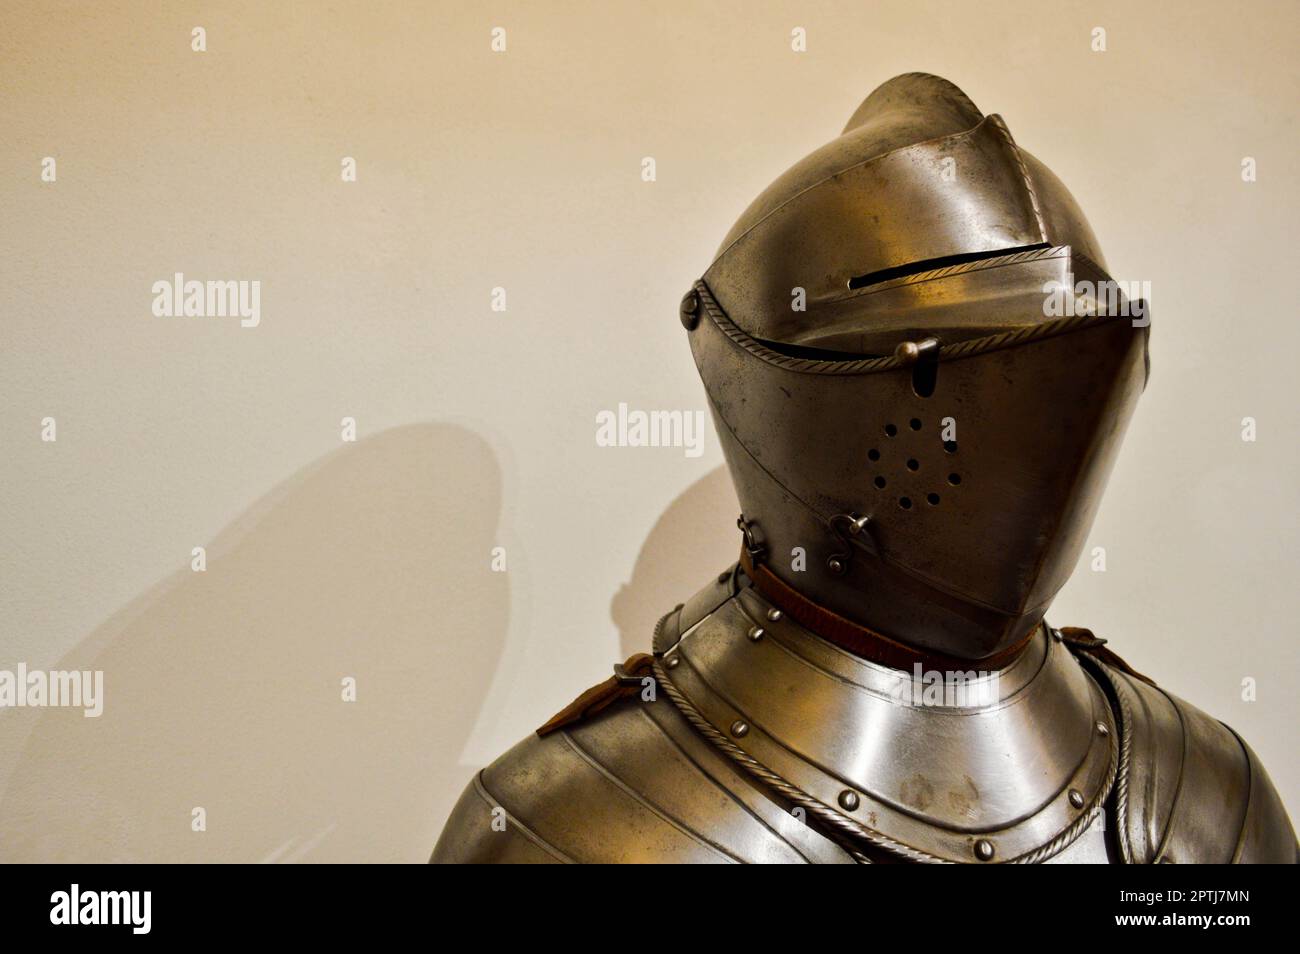 Medieval strong knight warrior chained in iron silvery strong metal armor with a helmet and a visor. Stock Photo